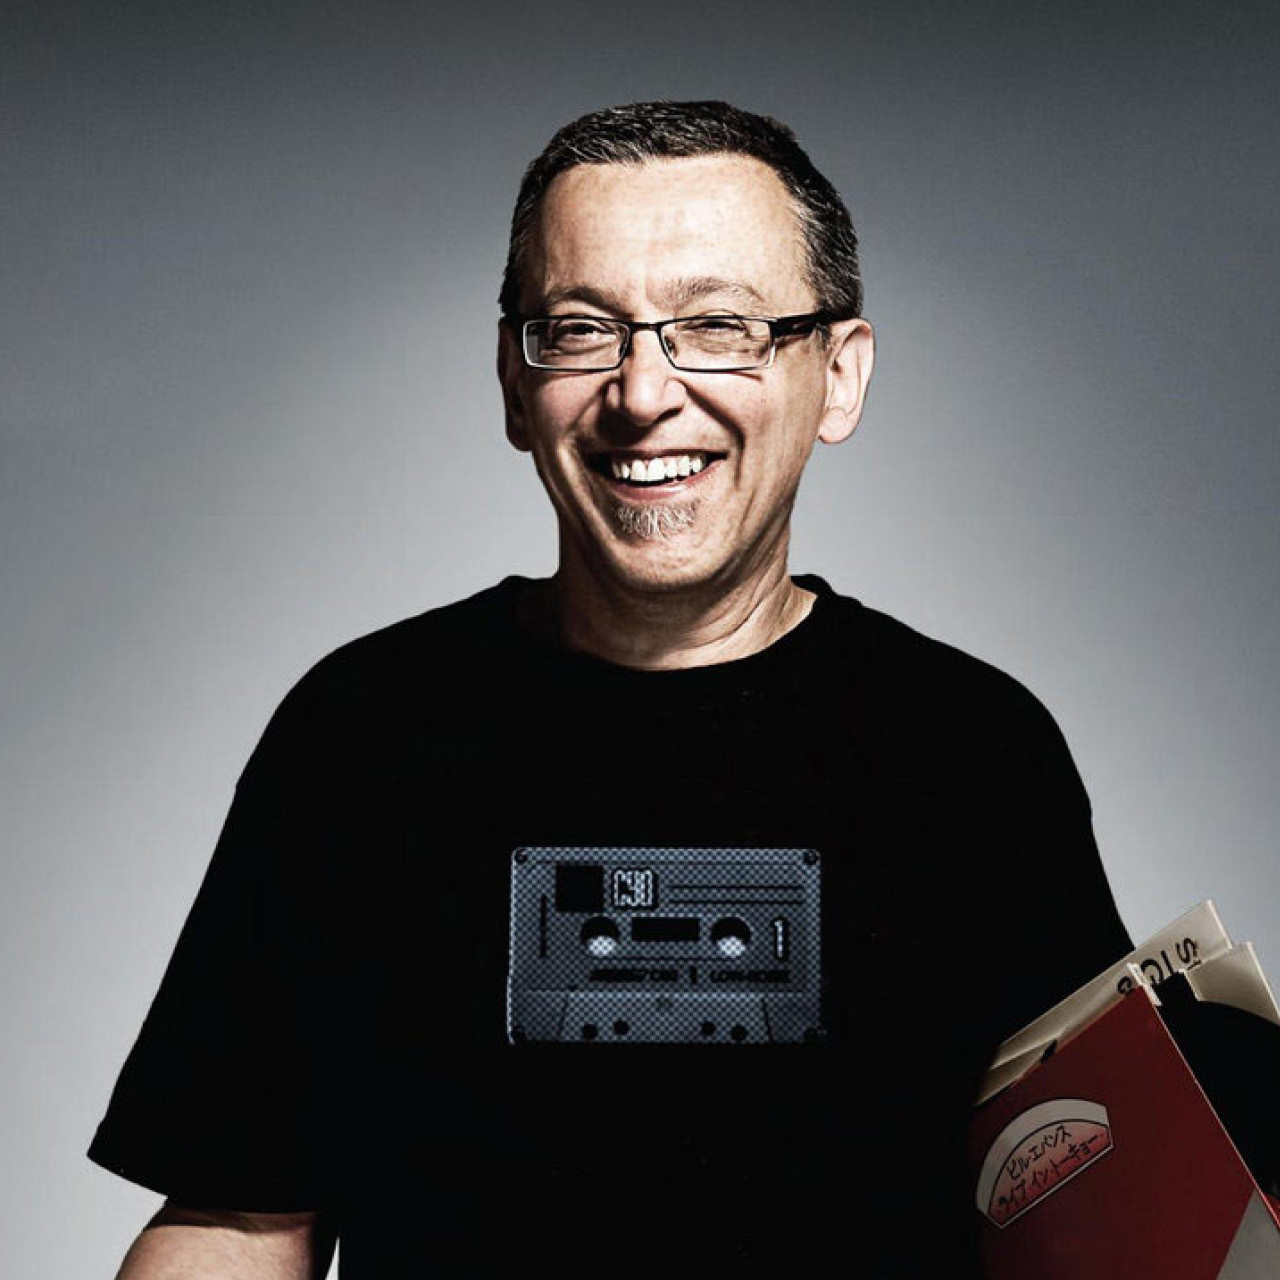 Radio producer and host Nou Dadoun smiling and carrying vinyl under his arm